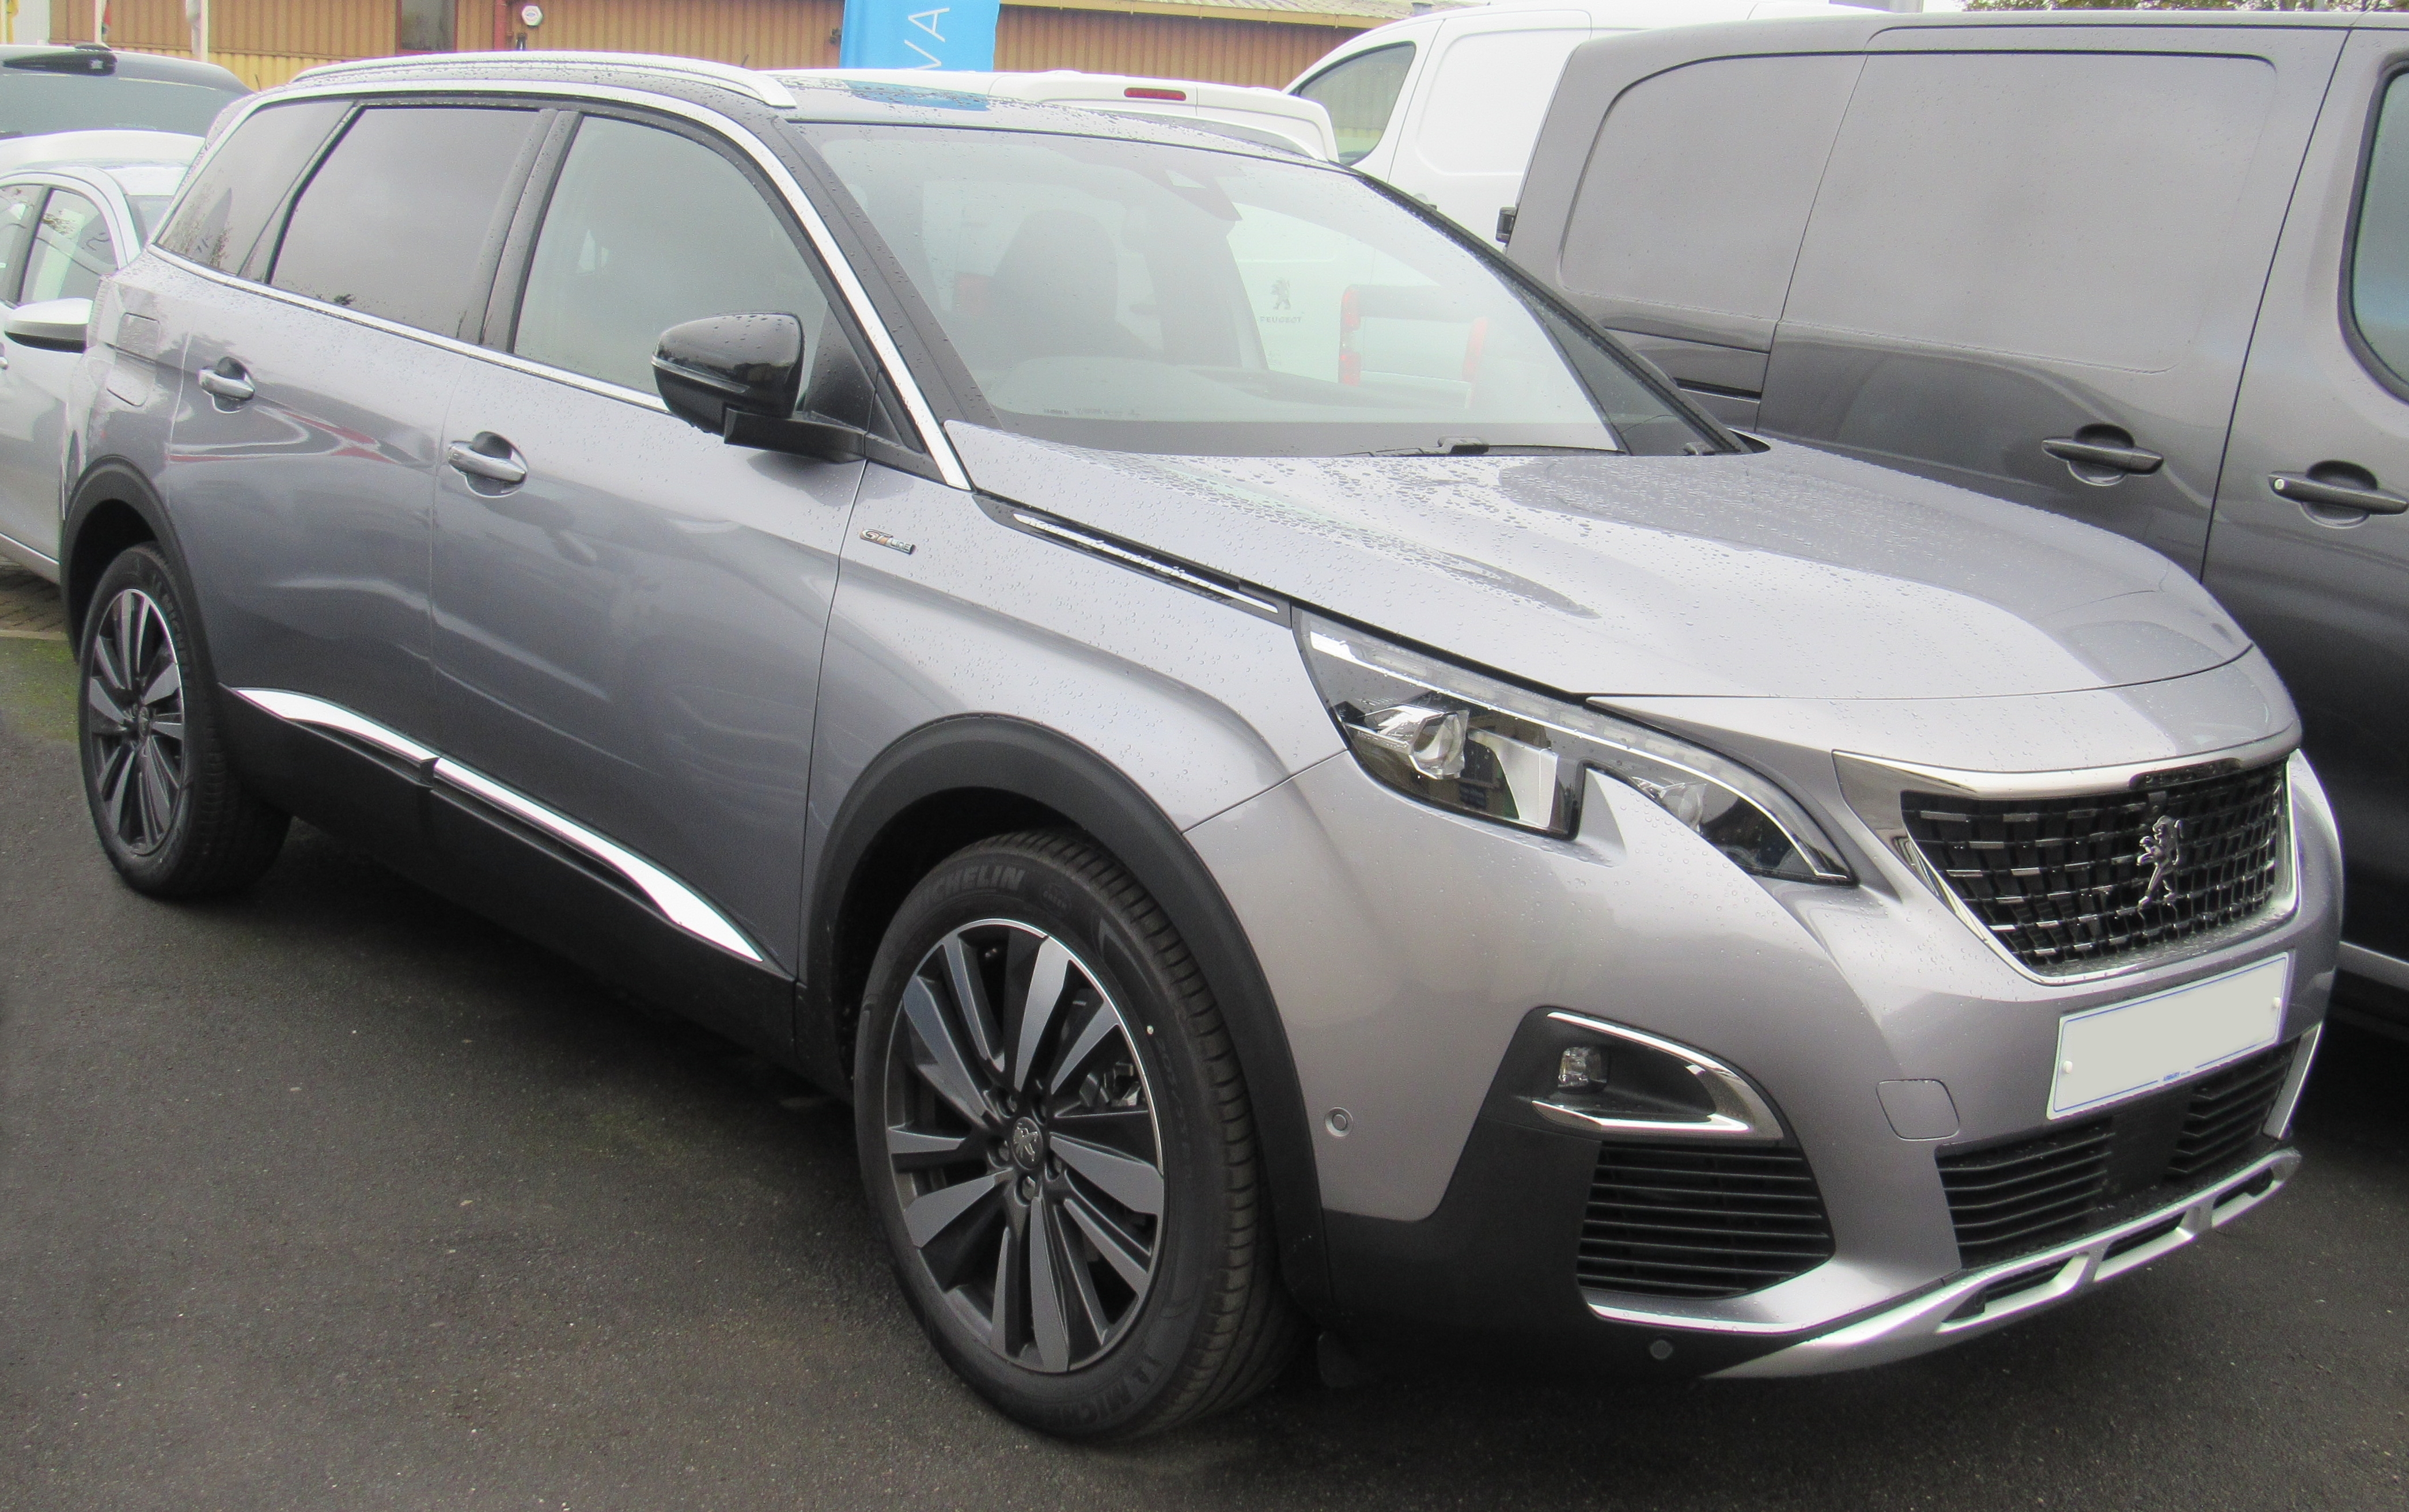 Used Peugeot 5008 (Mk2, 2017-date) review